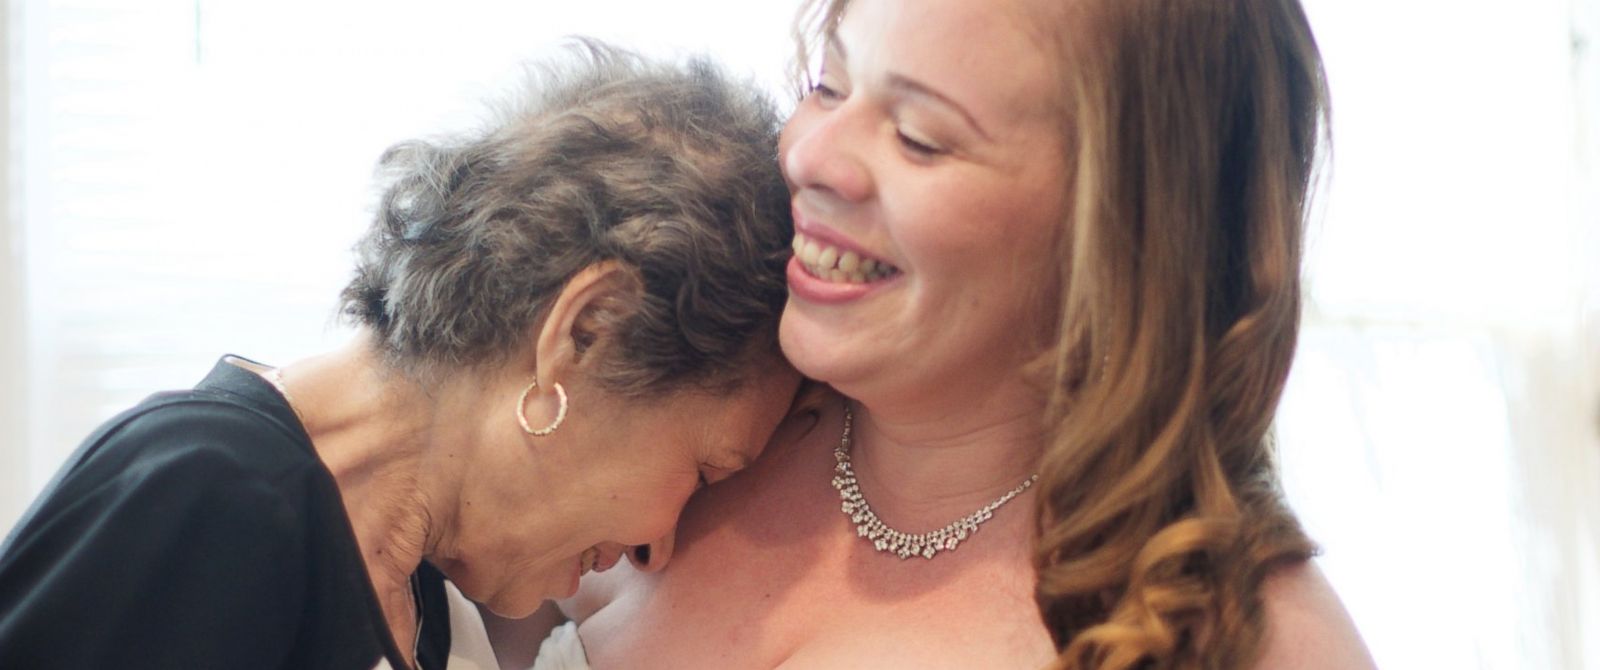 Strangers arrange free wedding in 2 days for bride with mother dying of cancer